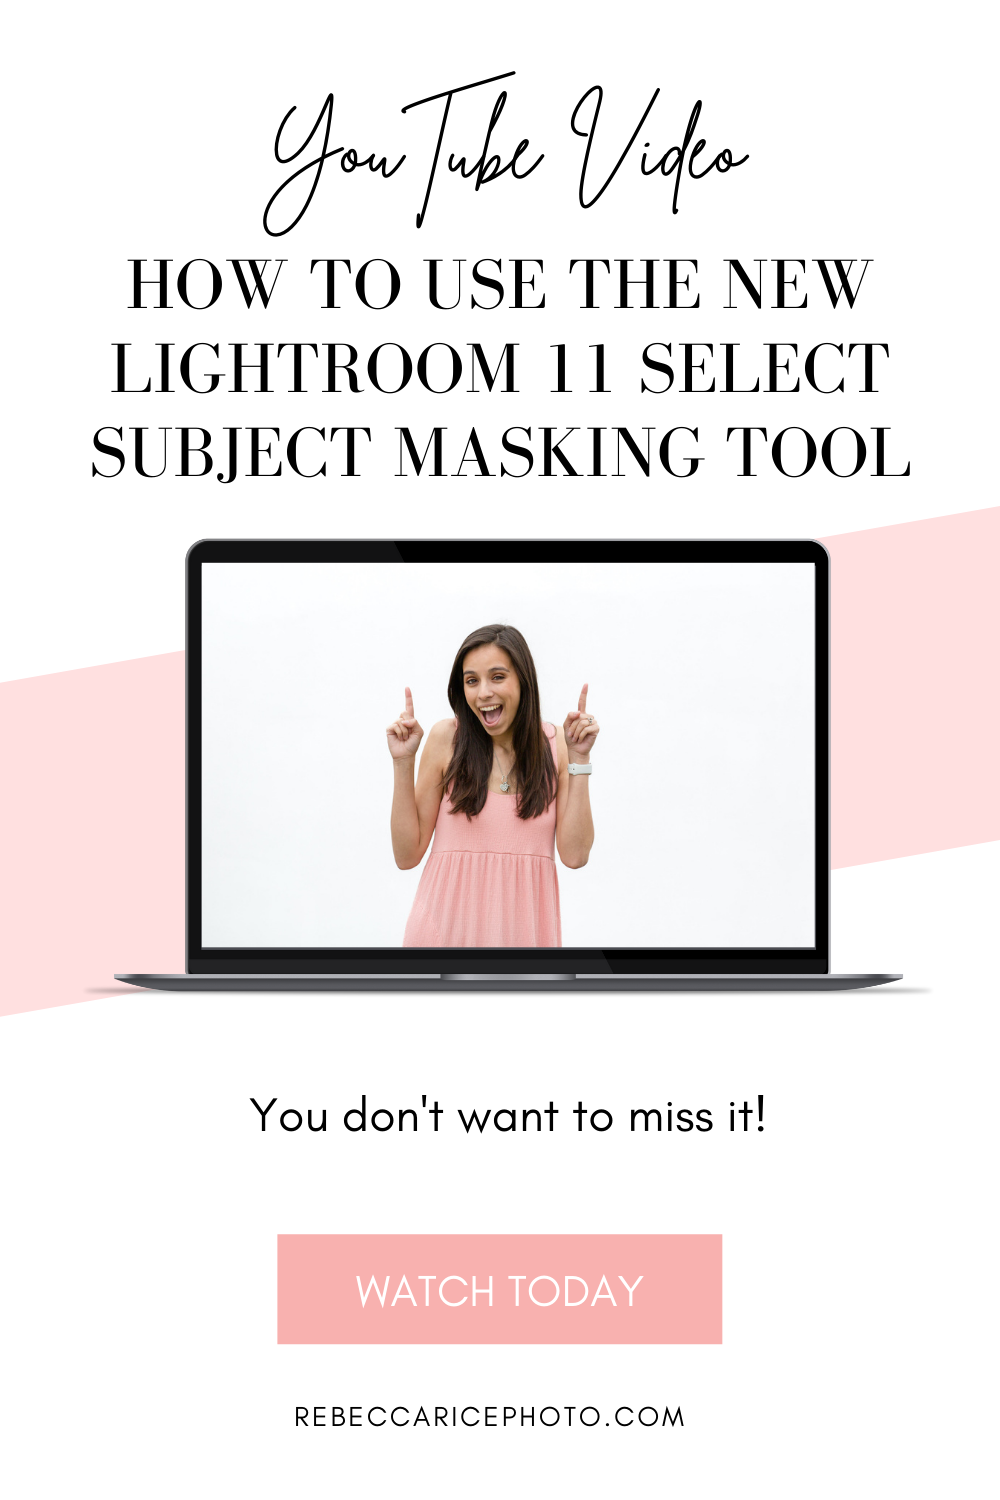 How to Use the New Lightroom 11 Masking Tool | Lightroom Tool